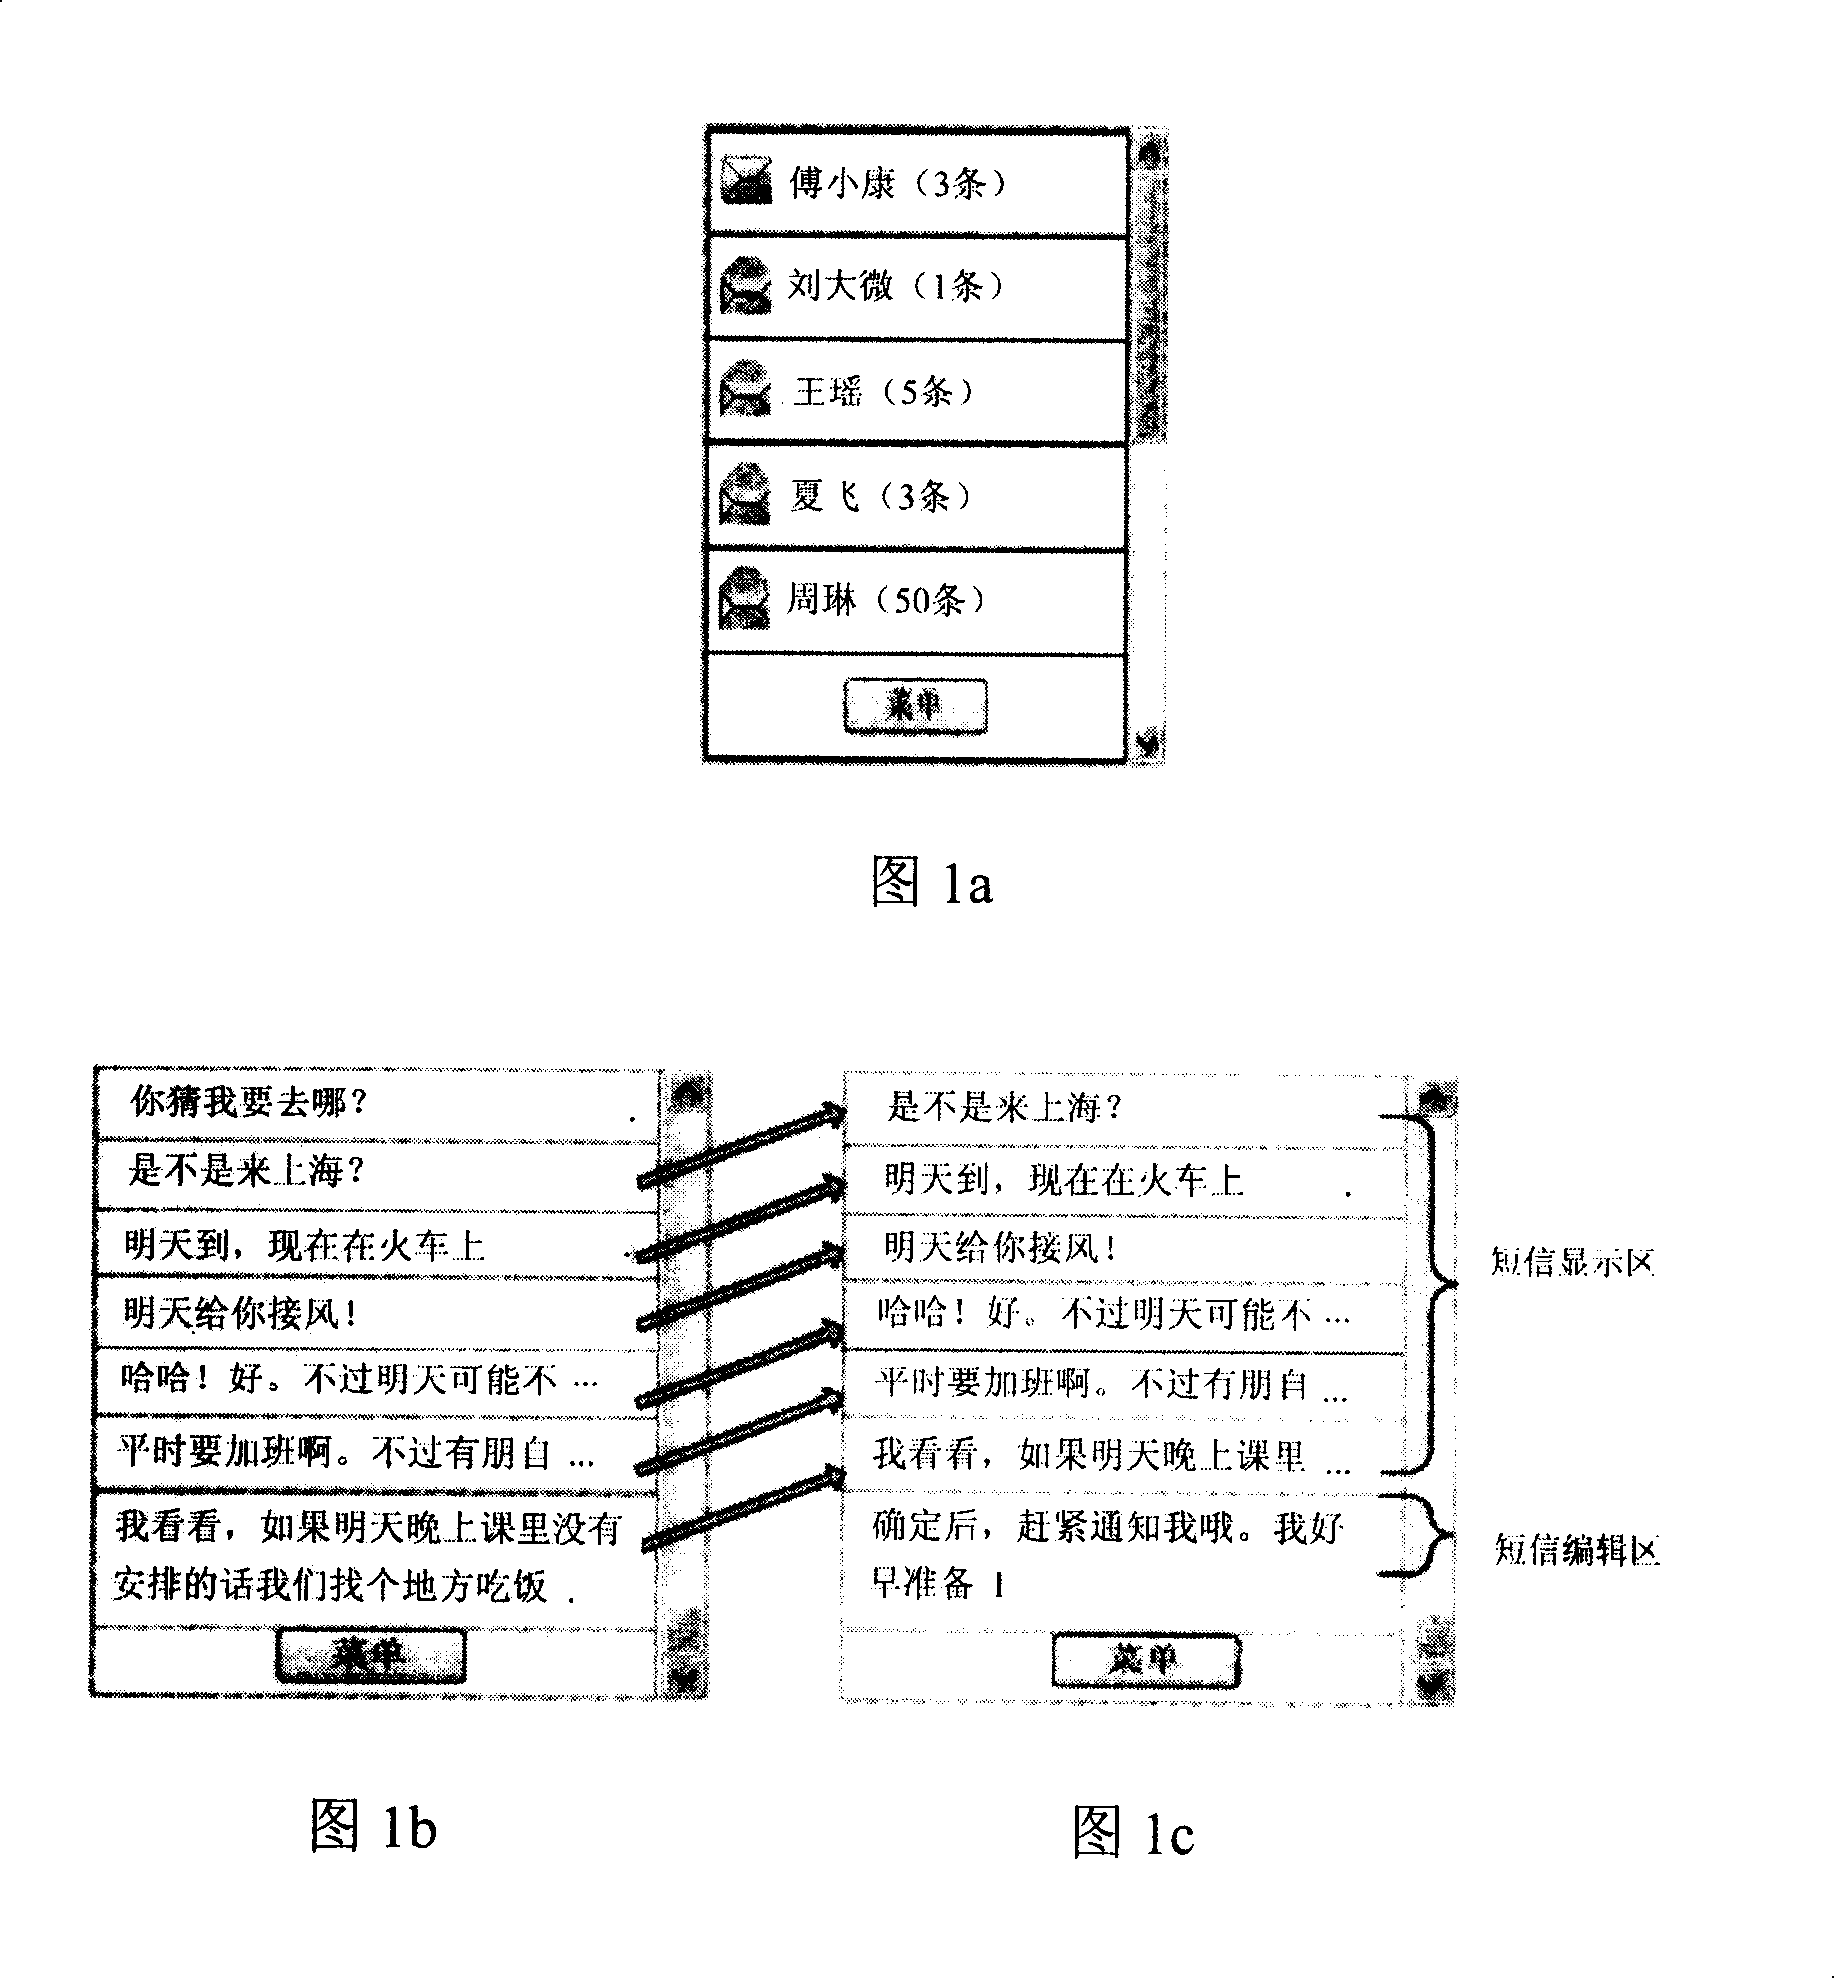 Method for grouped organizing mobile phone short message according to linkman and operating in chat type interface